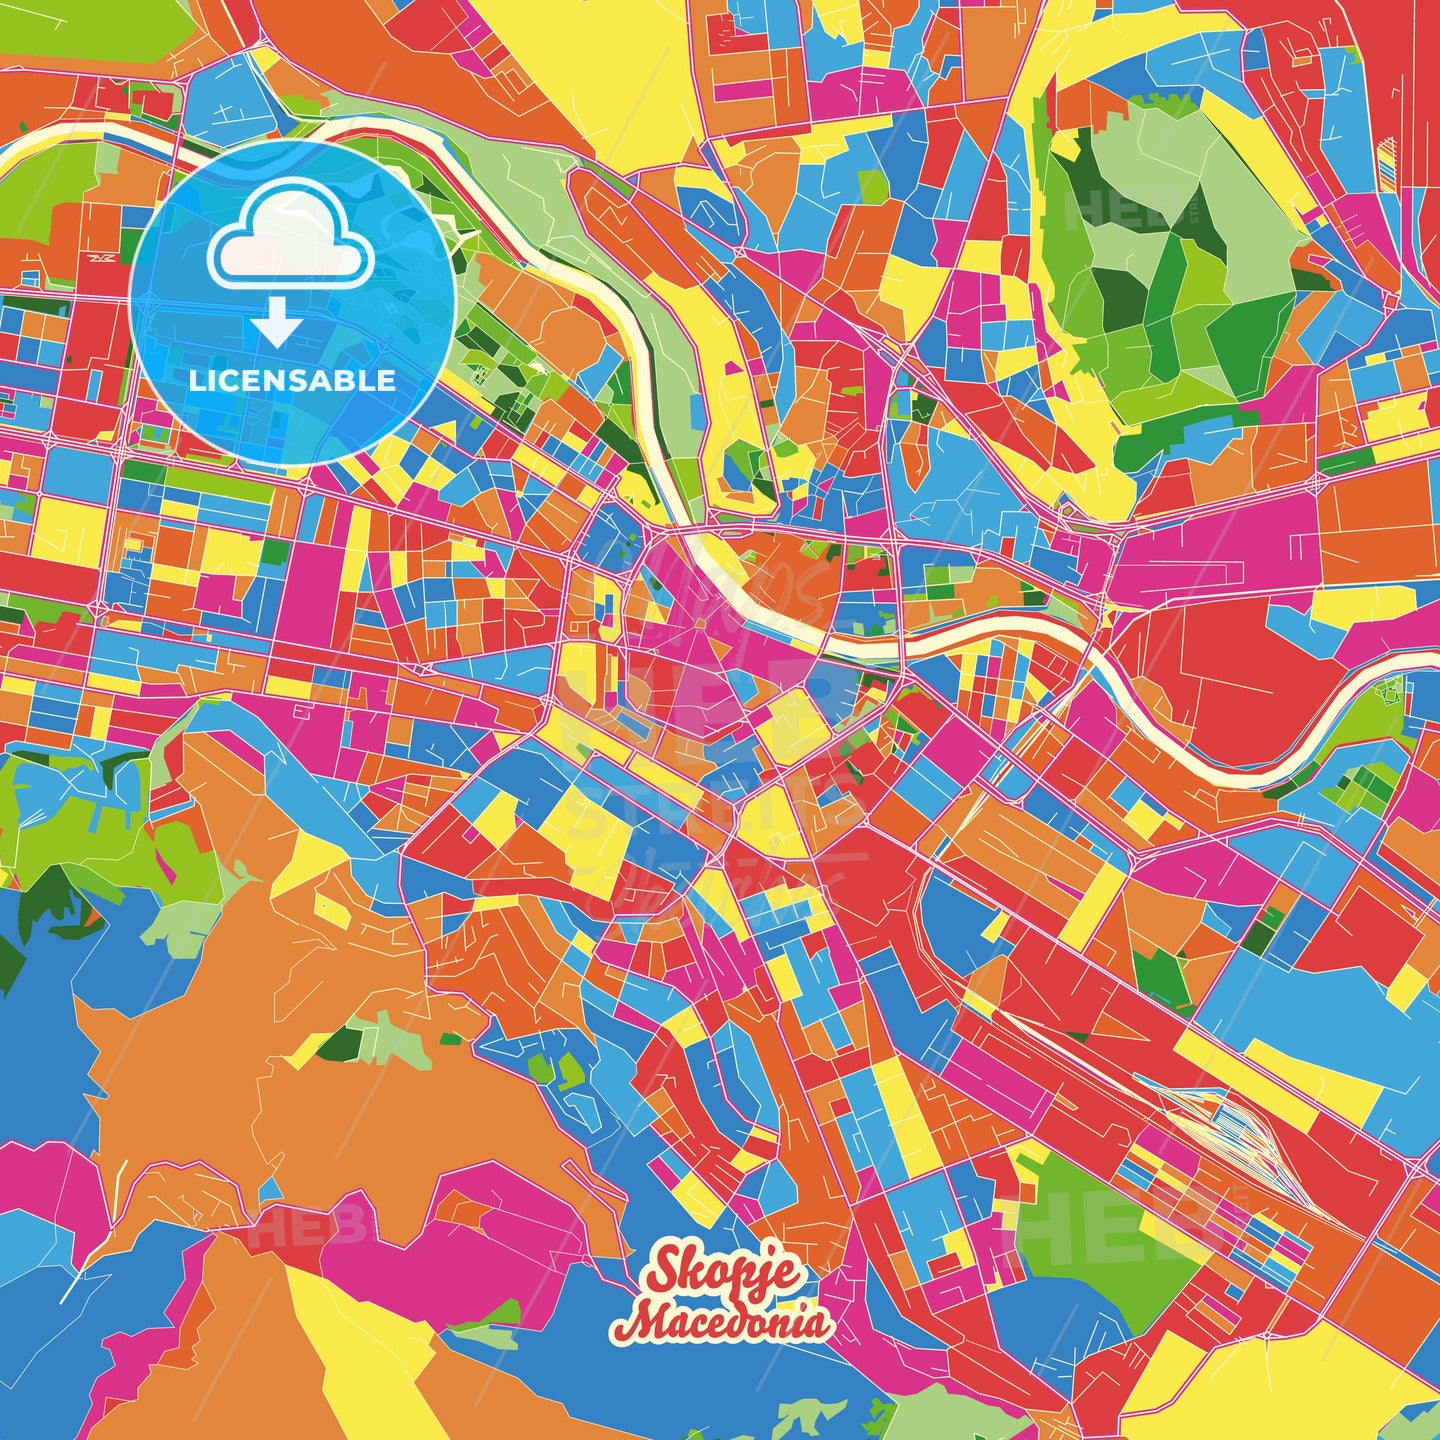 Skopje, North Macedonia Crazy Colorful Street Map Poster Template - HEBSTREITS Sketches